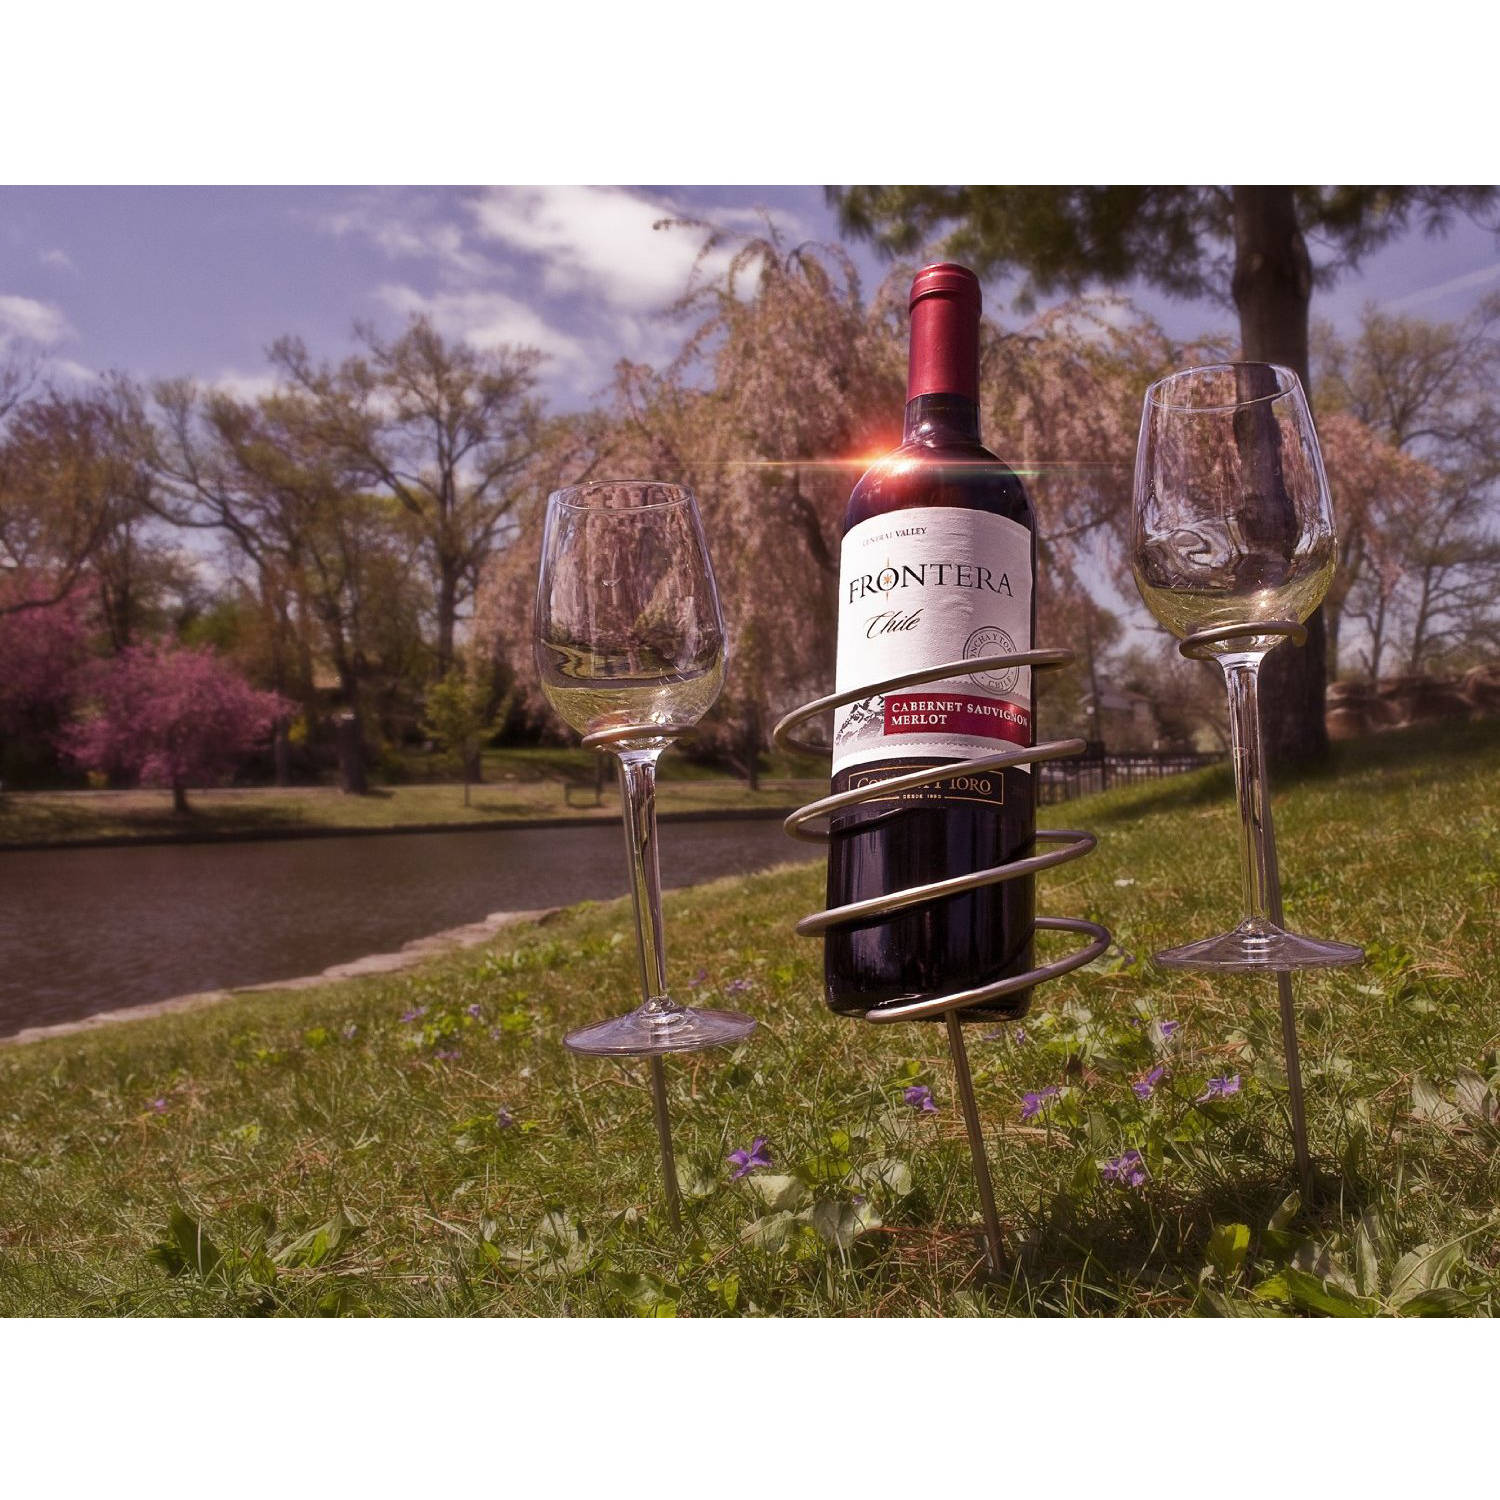 Sorbus Wine Stakes Set, Wine Sticks Holds Bottle and 2 Glasses Preventing Them from Spilling or Breaking, Great for Outdoor Drinking By Picnic, Camping or Party - image 2 of 3